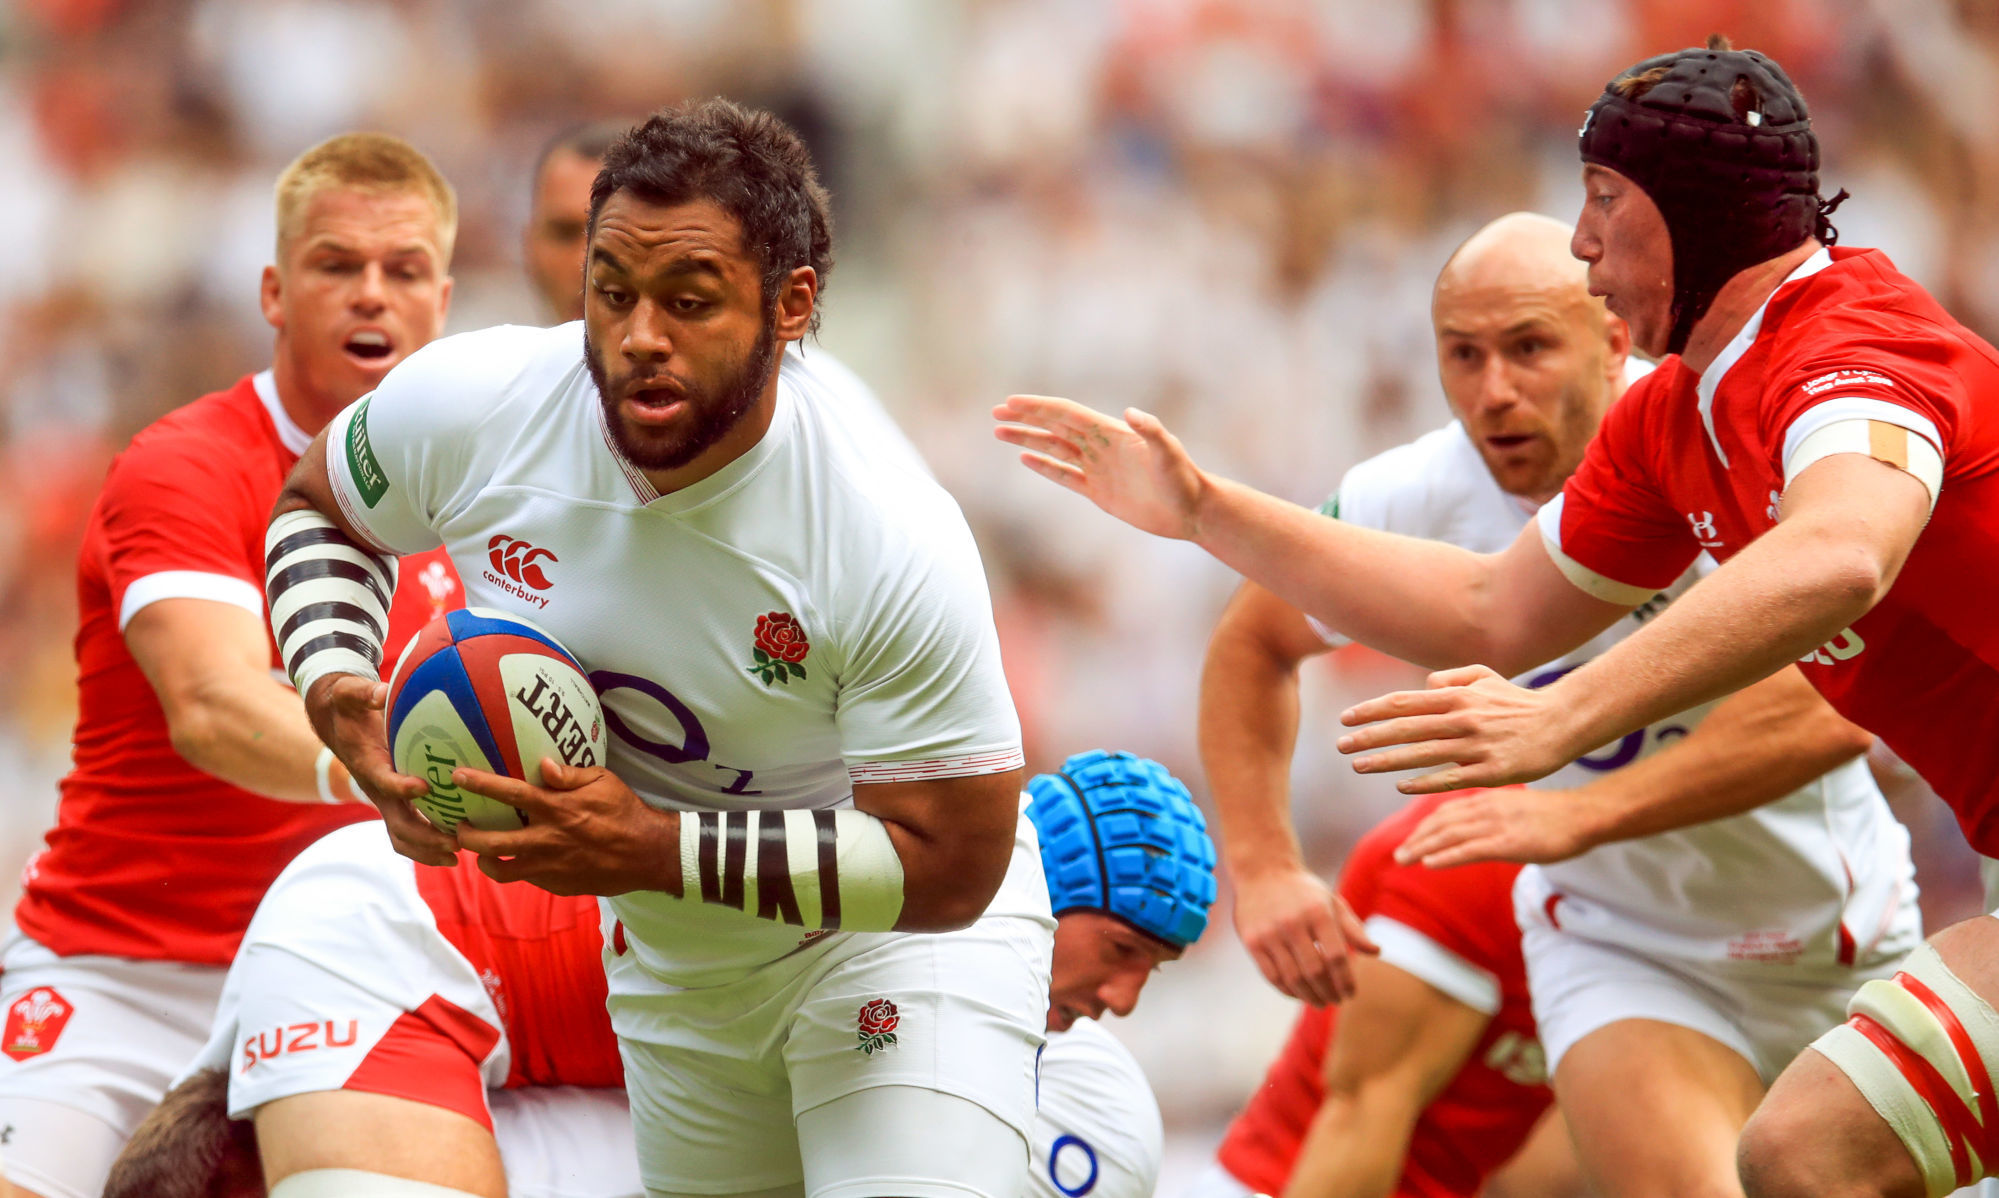 Billy Vunipola - XV d'Angleterre. Photo : PA Images / Icon Sport